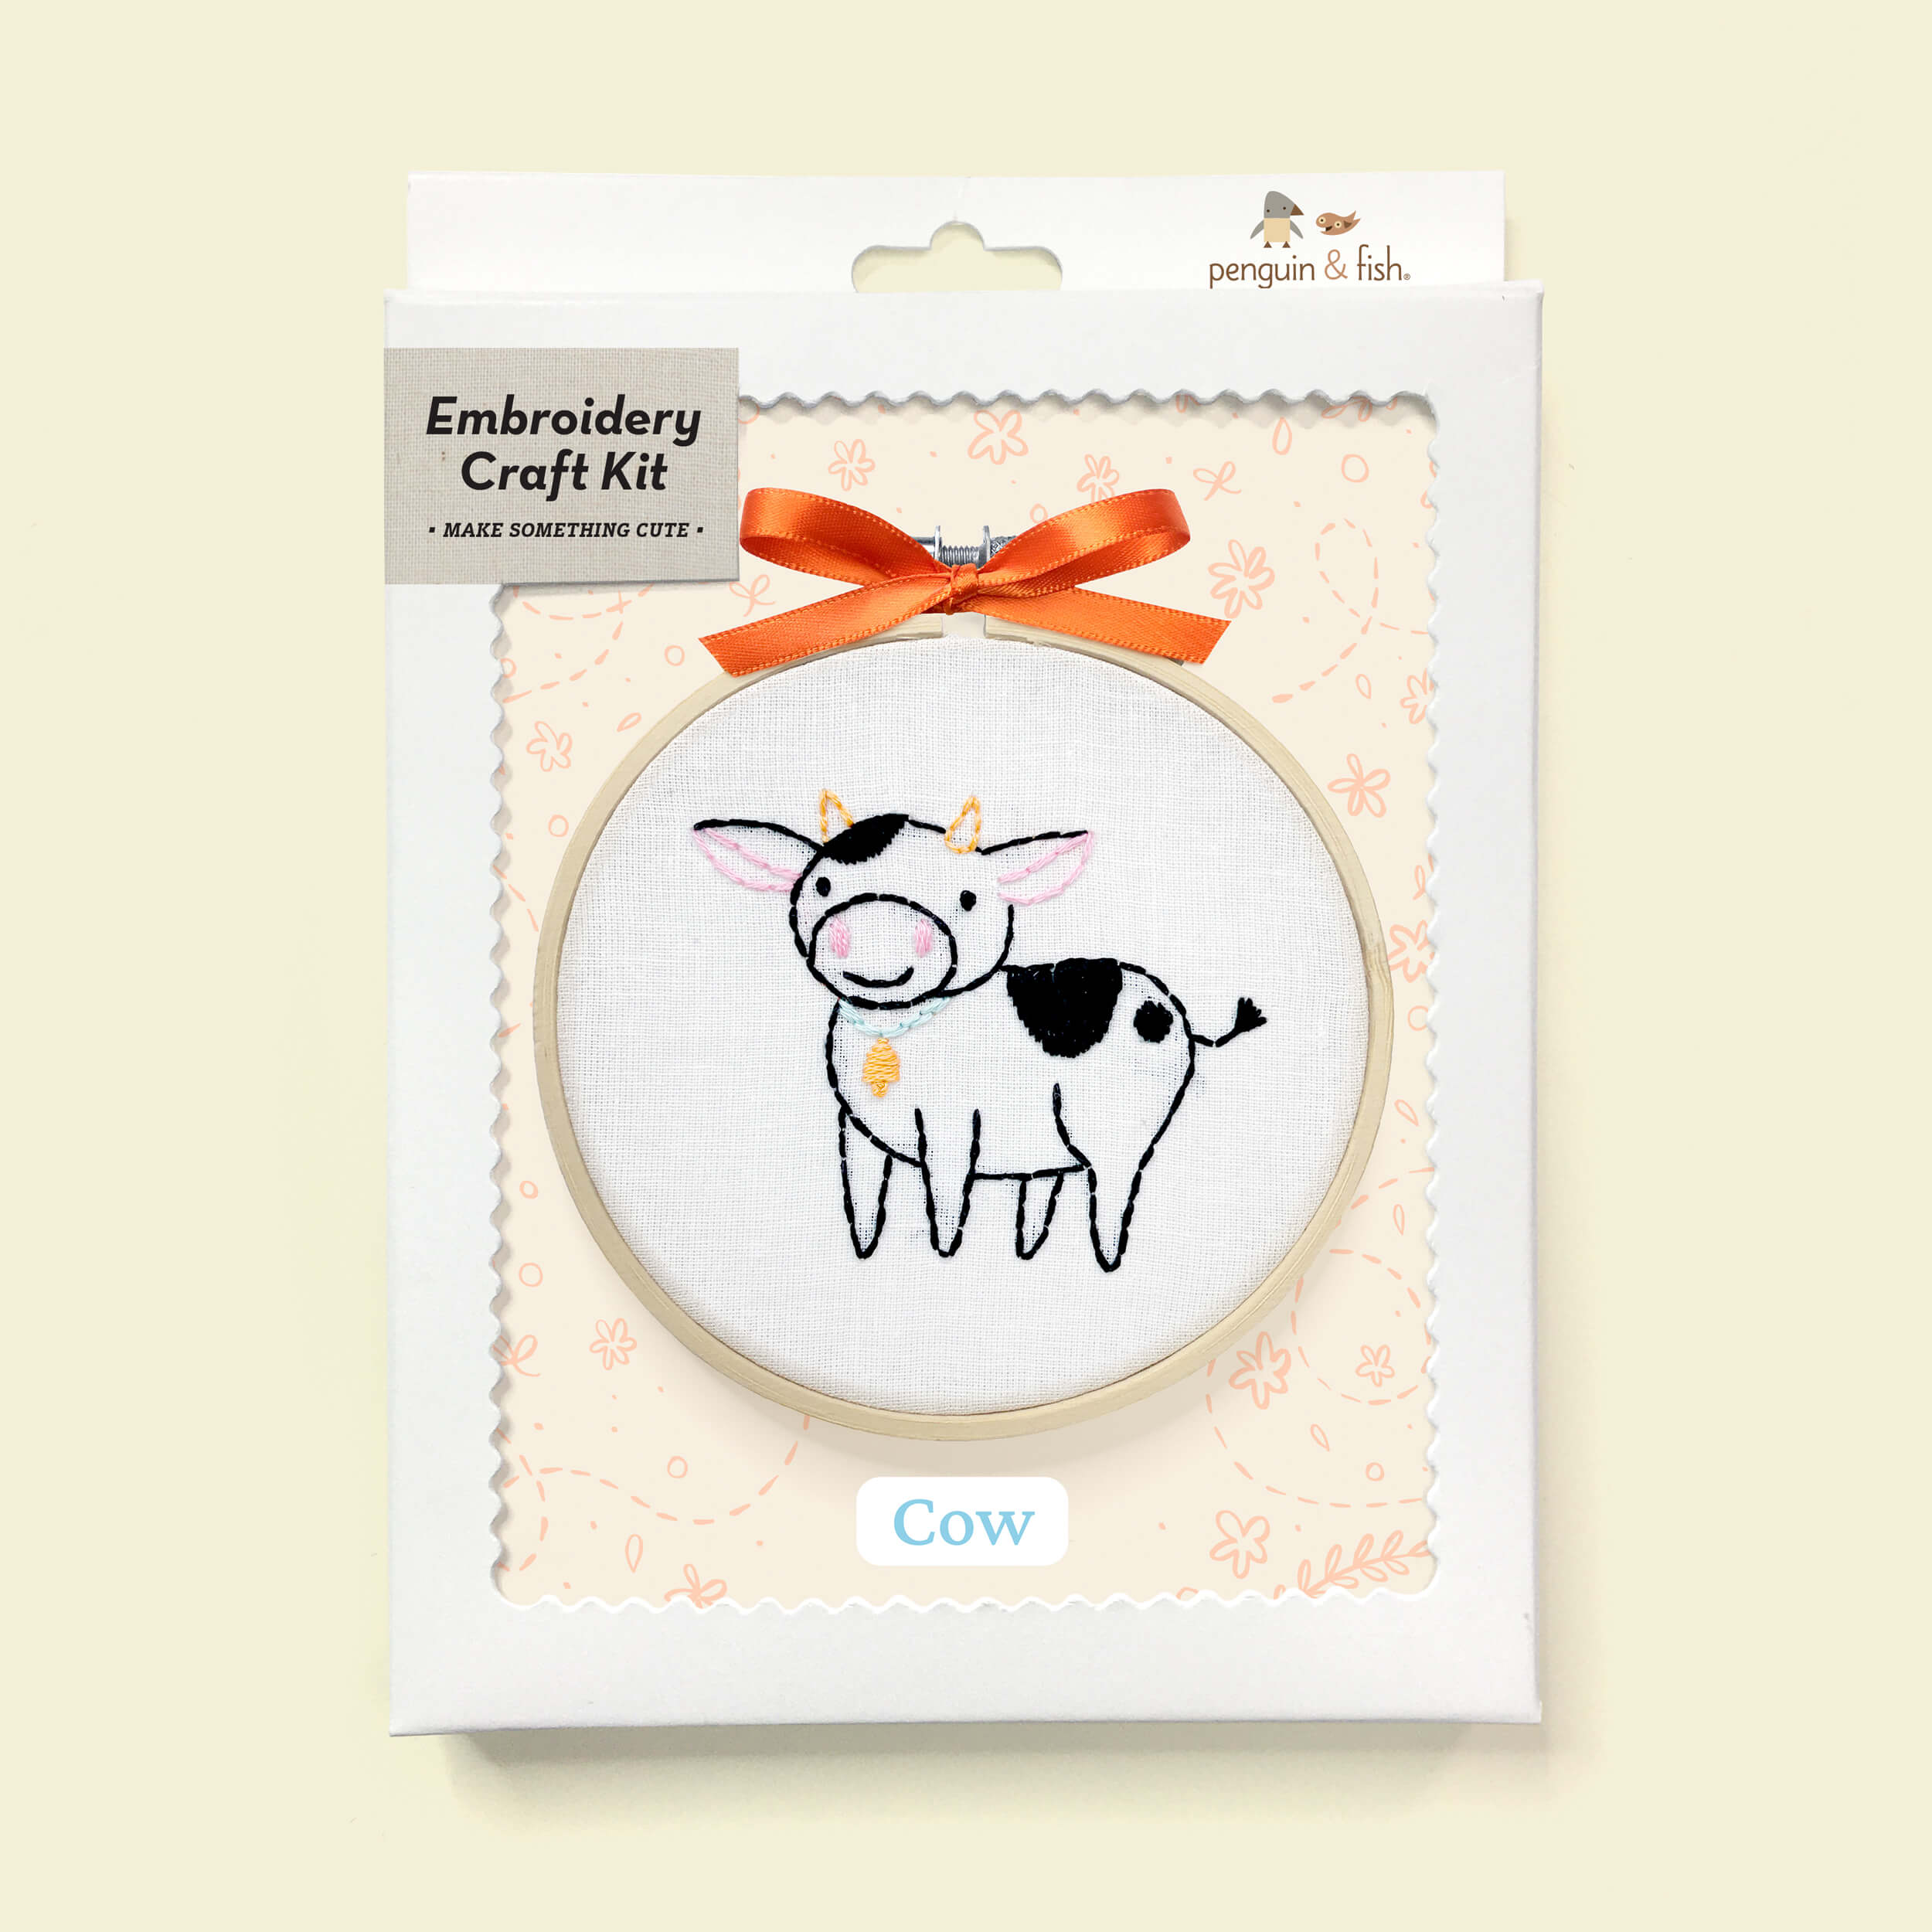 Cow embroidery kit for beginners in a box